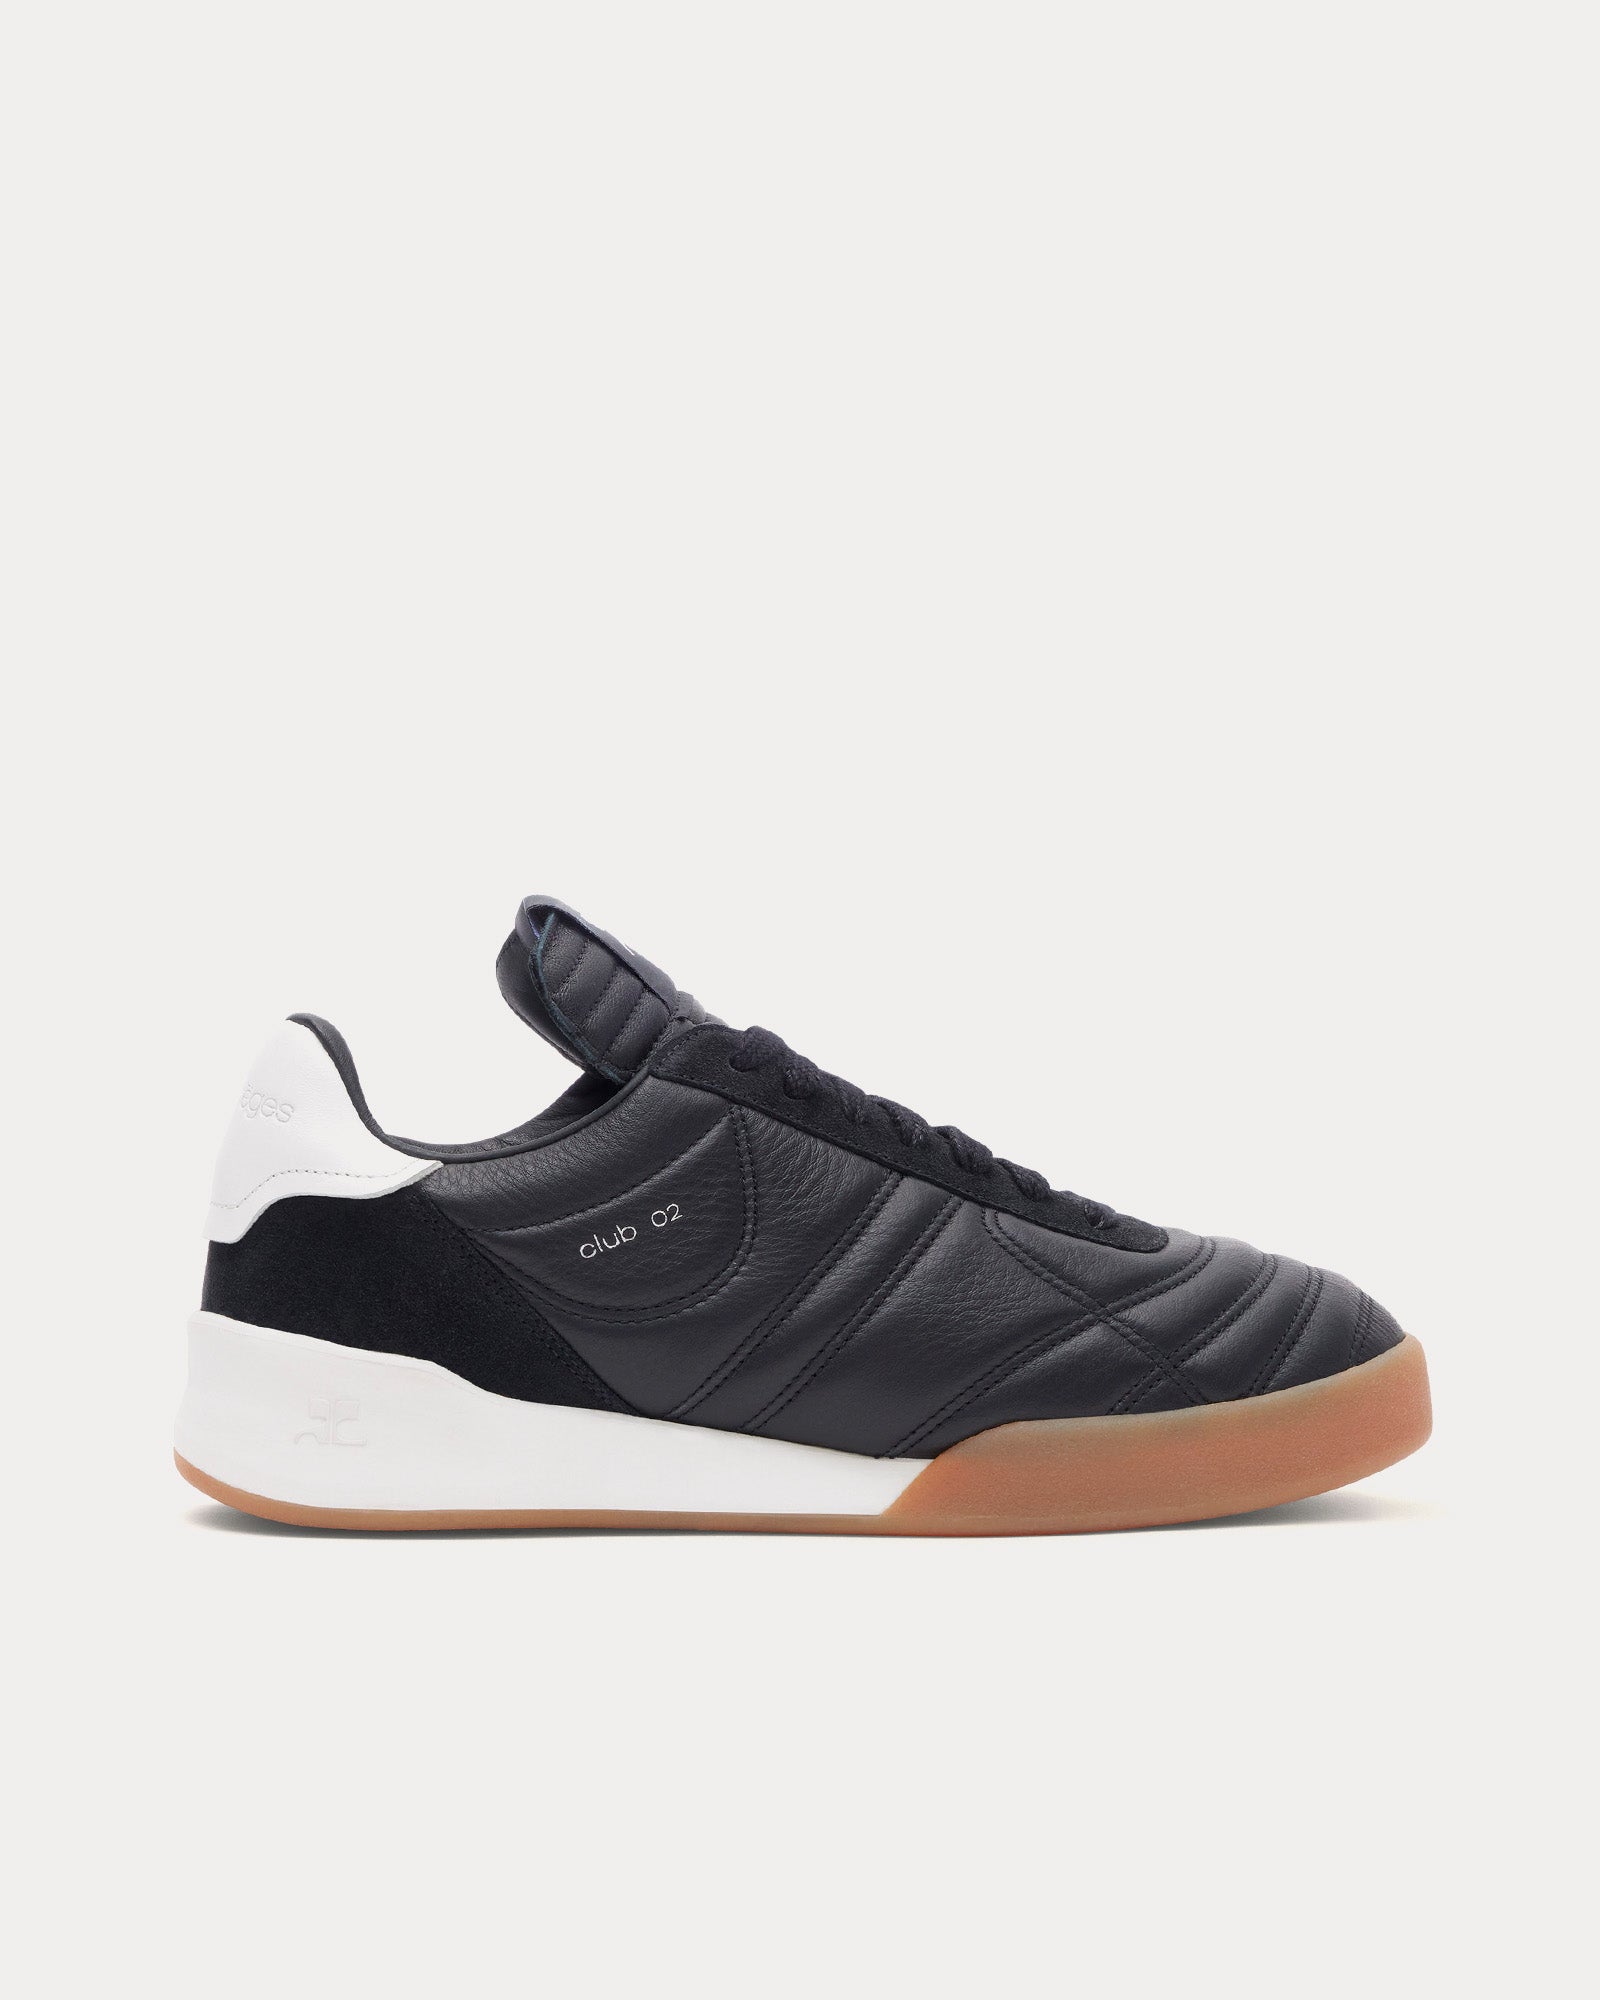 Courrèges - Club 02 Leather Black Low Top Sneakers